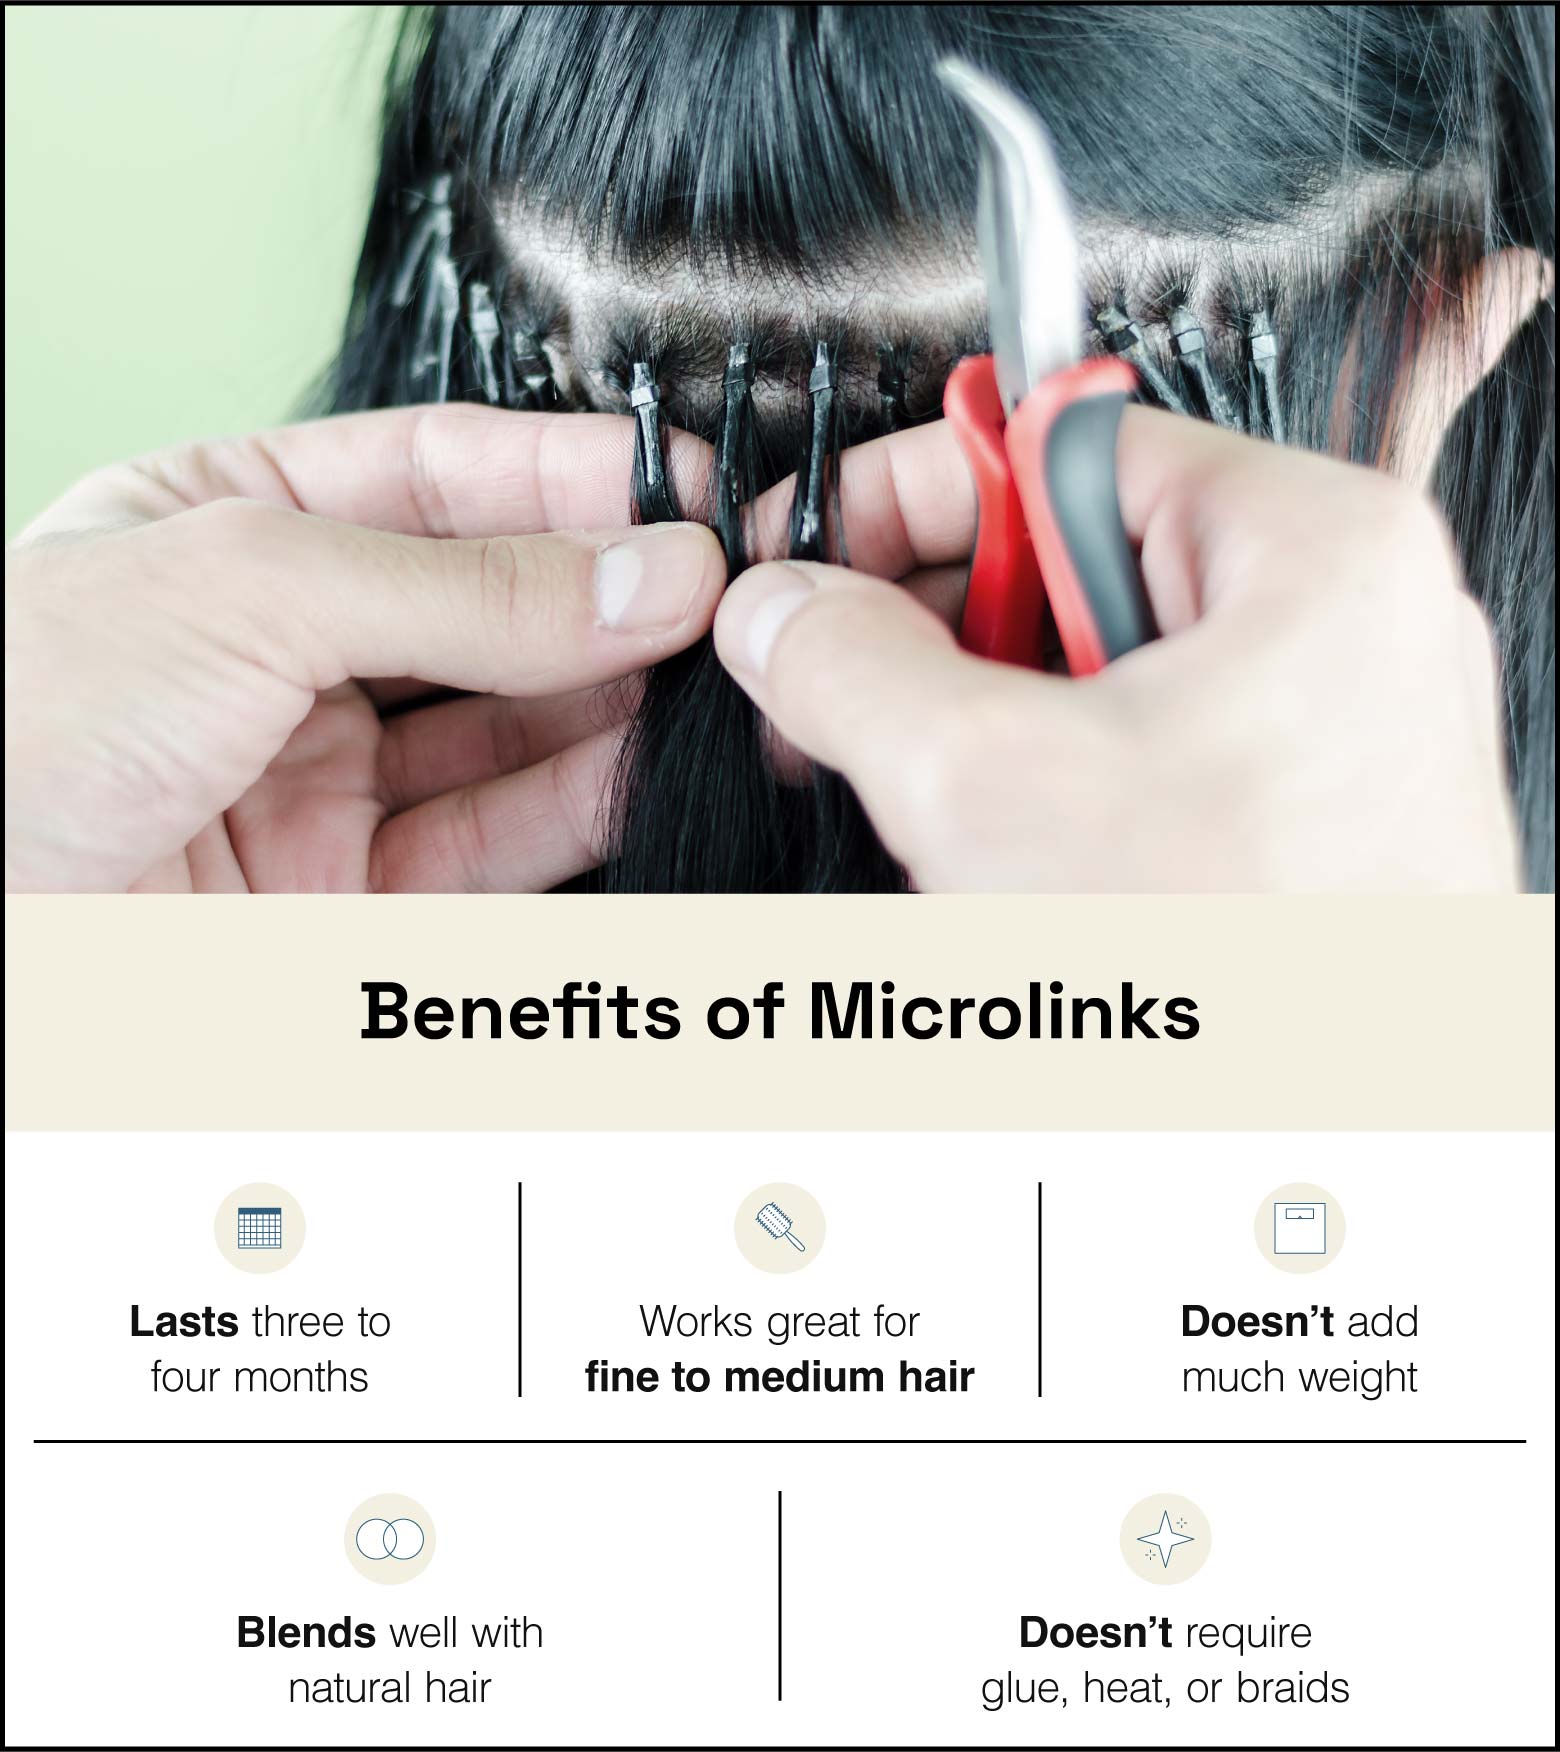 Image where client’s hair is sectioned to show visible metal microlink beads with text below summarizing benefits of microlink extensions.